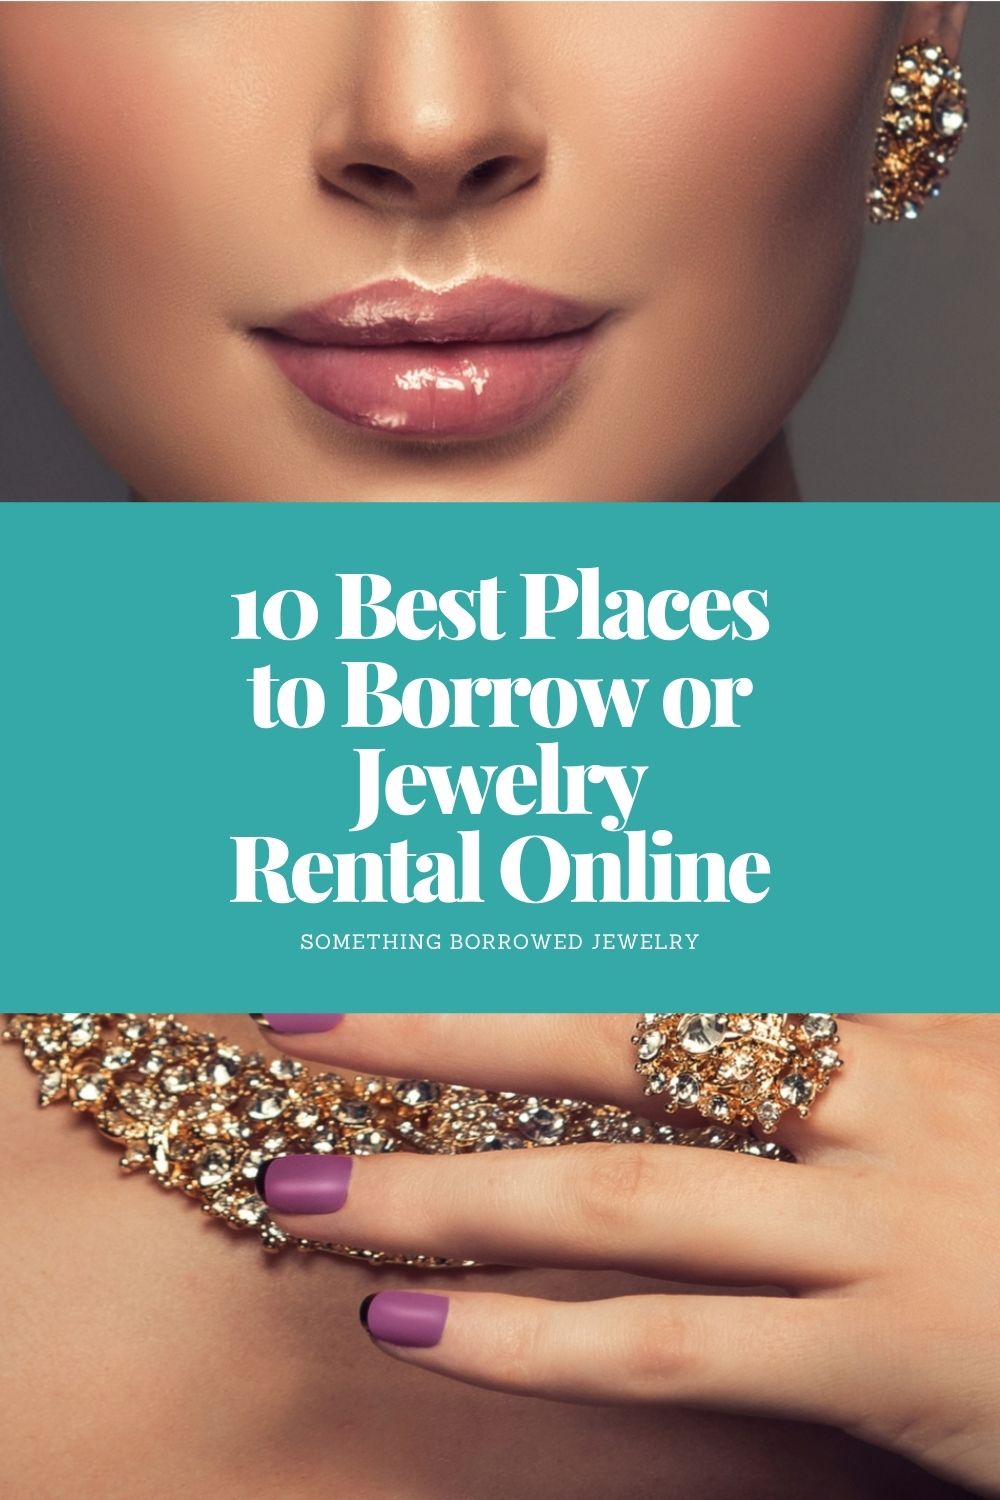 10 Best Places to Borrow or Jewelry Rental Online pin